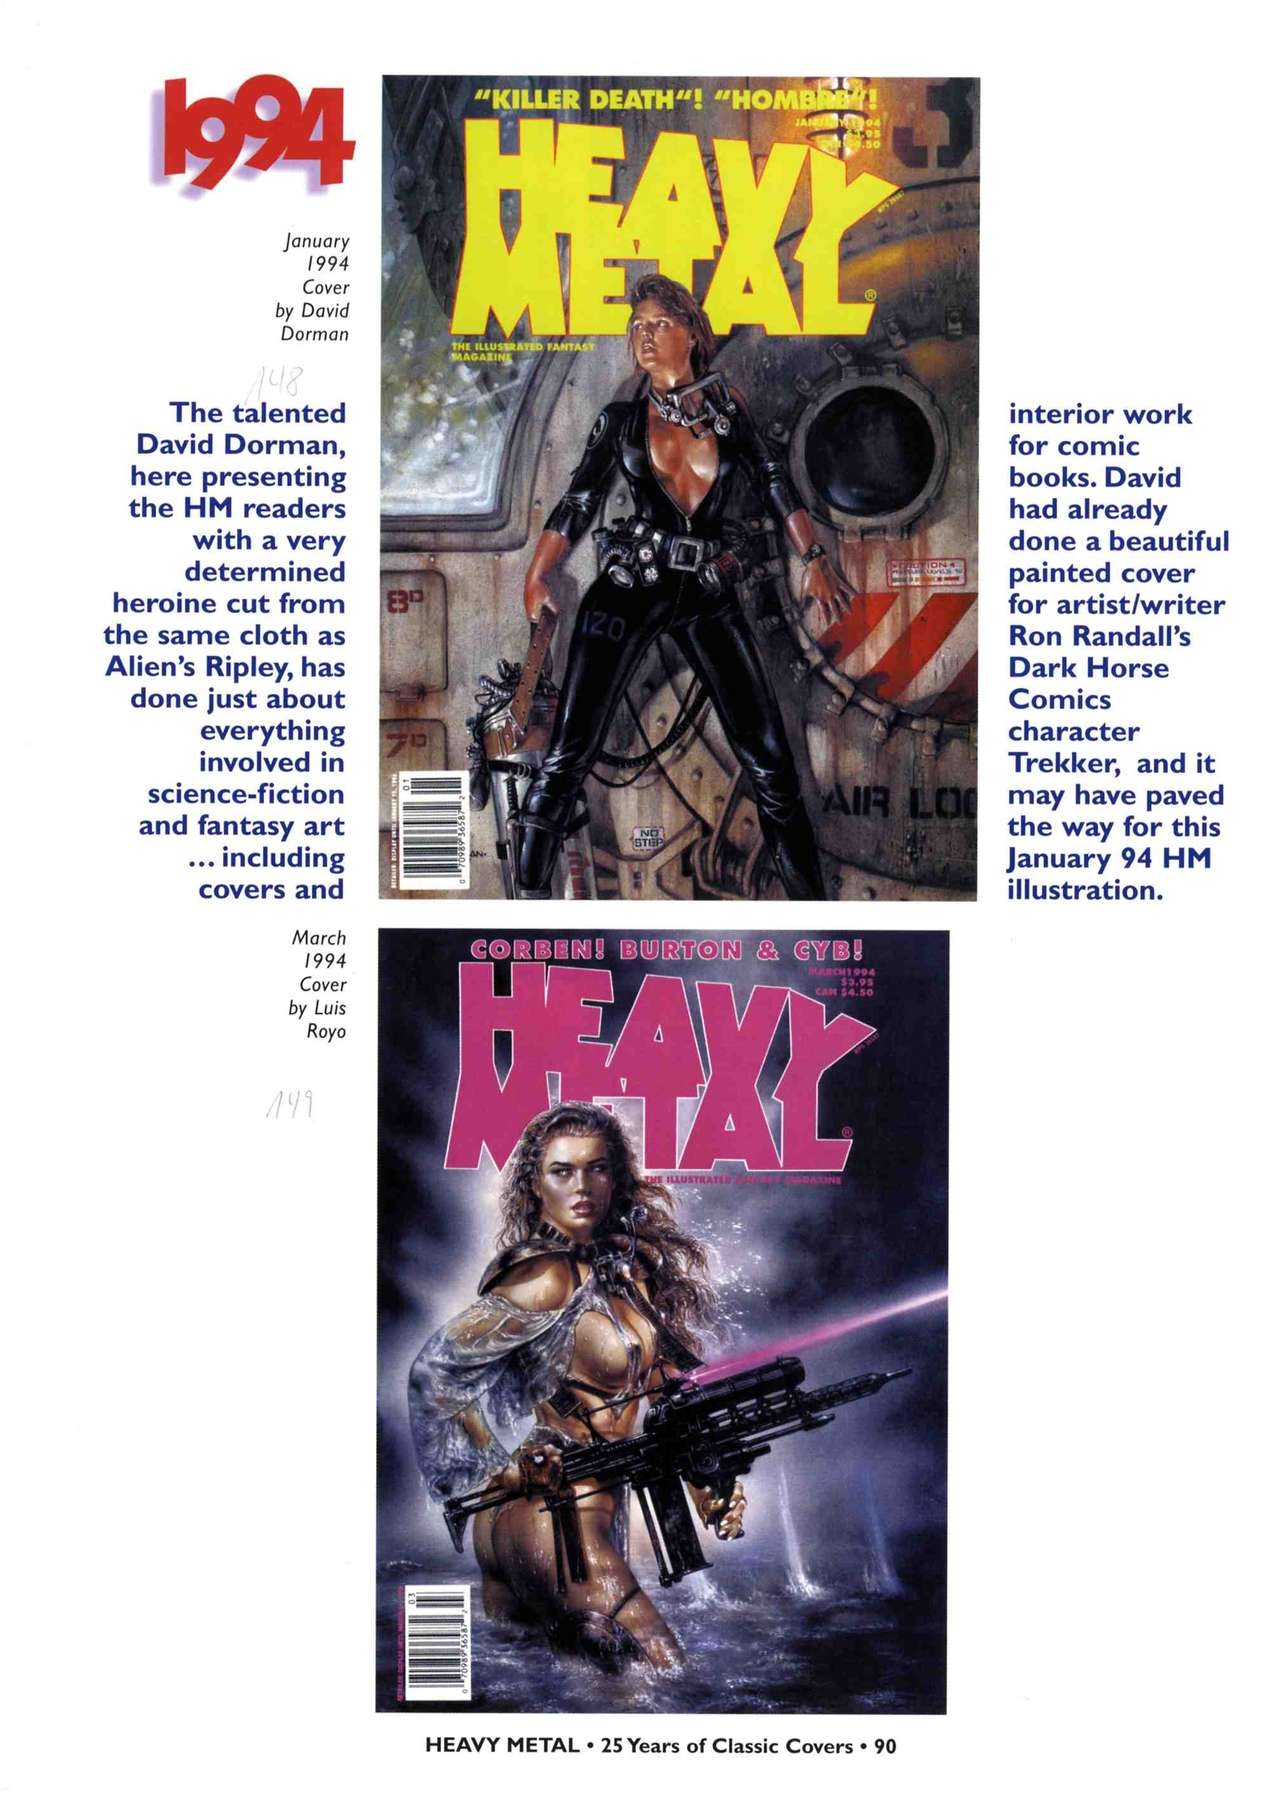 HEAVY METAL 25 Years of Classic Covers 95